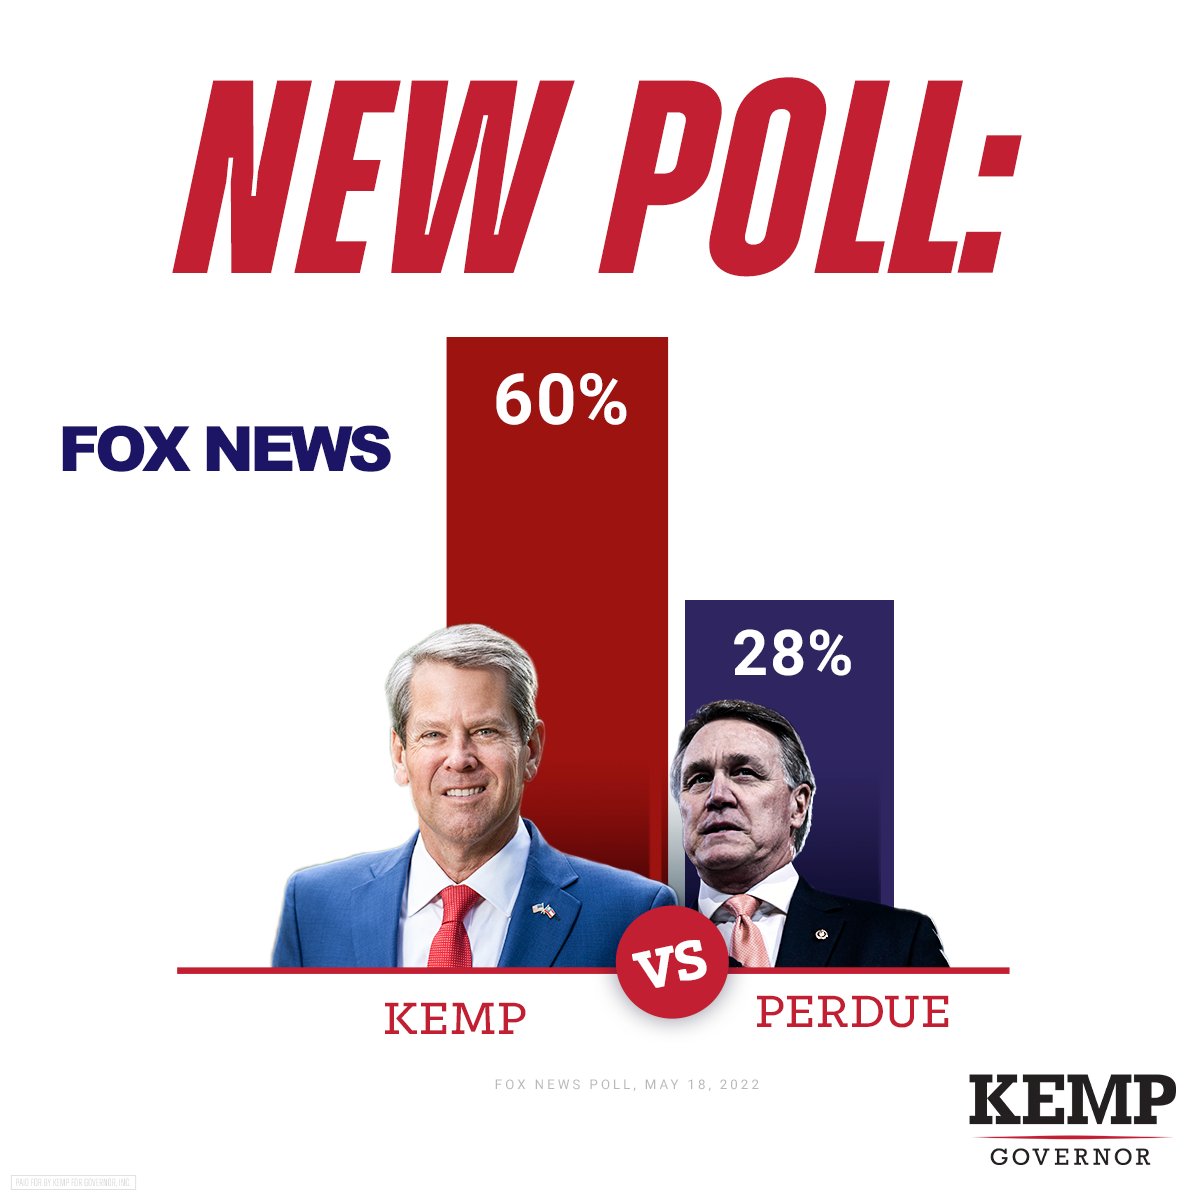 brian-kemp-on-twitter-the-latest-poll-from-foxnews-shows-governor